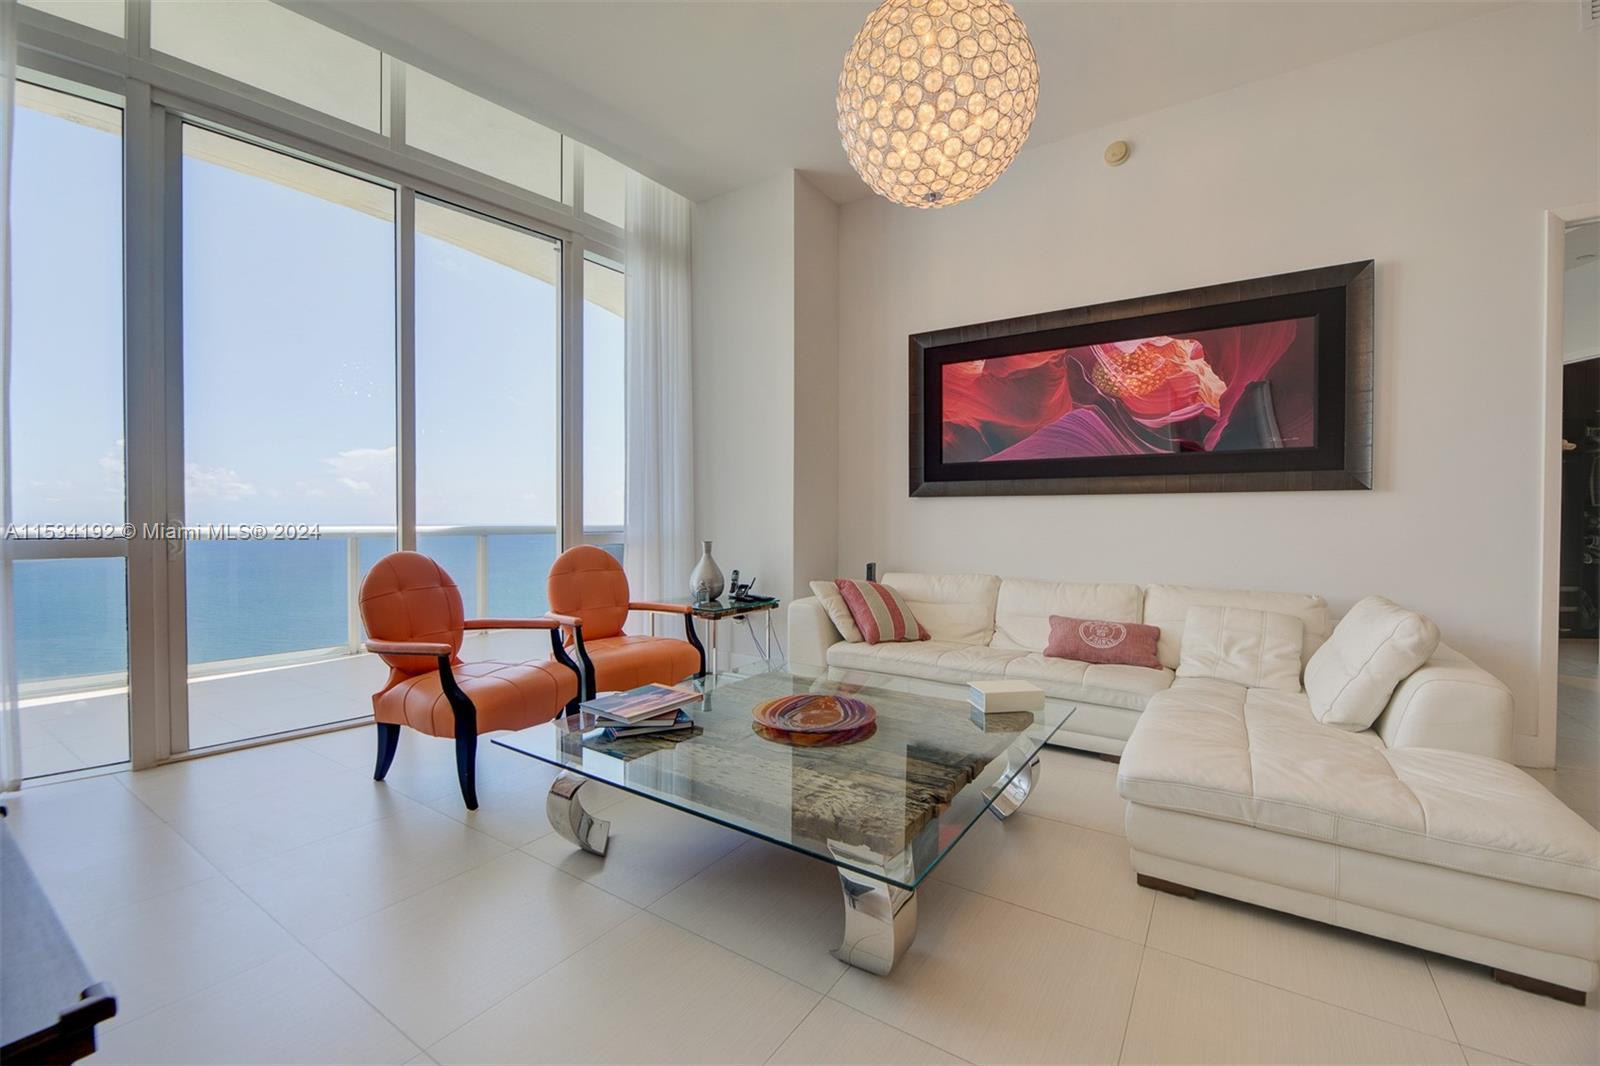 Photo of 15901 Collins Ave #4303 in Sunny Isles Beach, FL